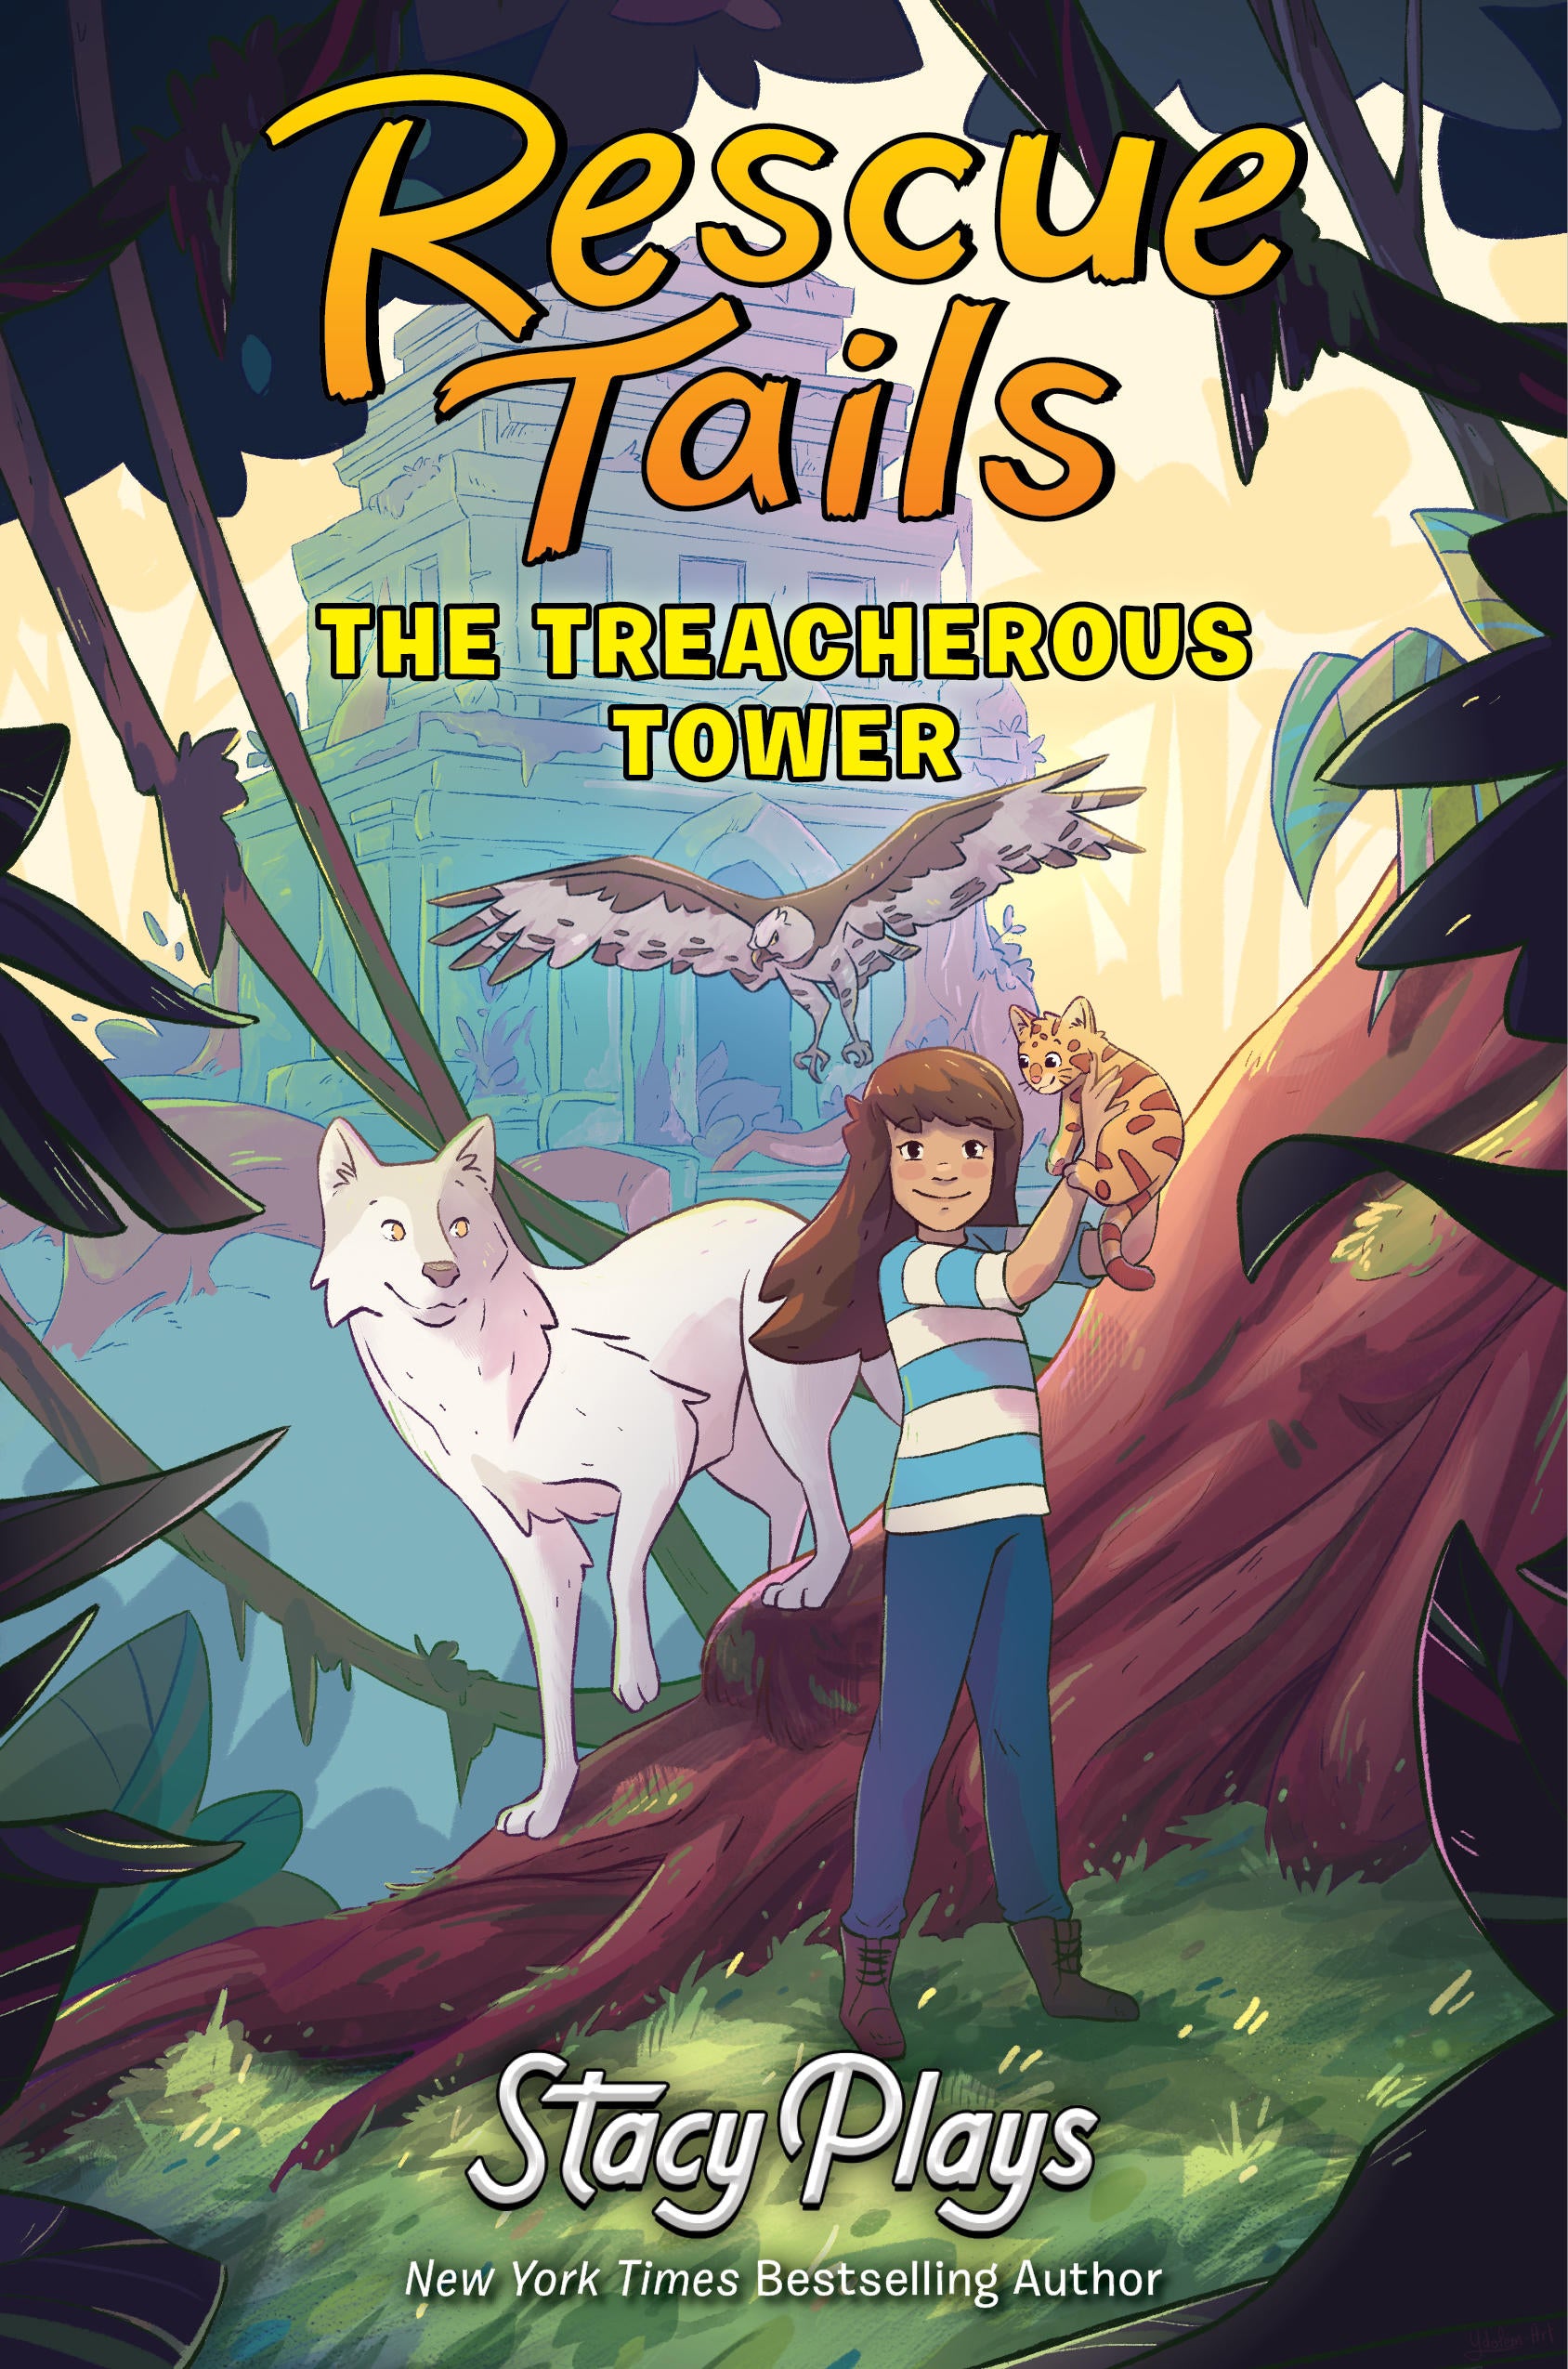 rescuetails1-cover.jpg